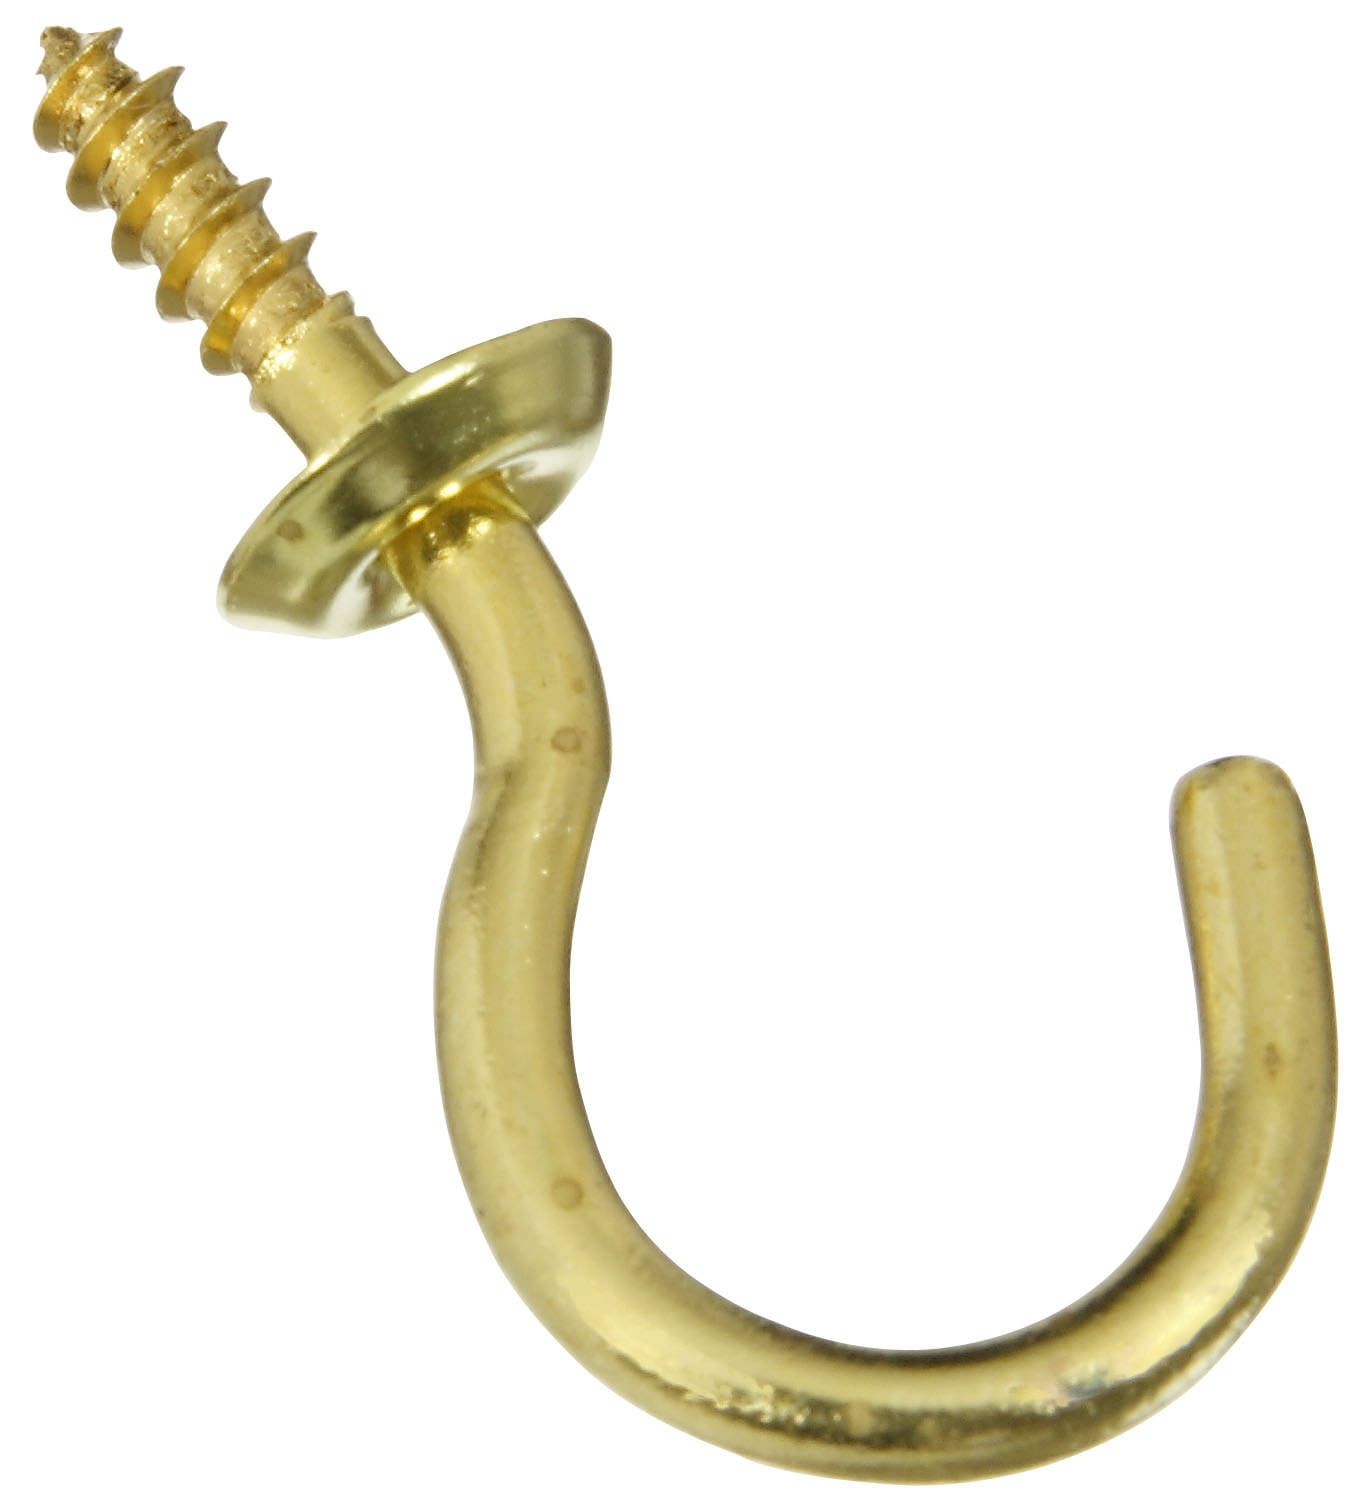 5706072 1 In. Cup Hook, Solid Brass - Pack Of 4